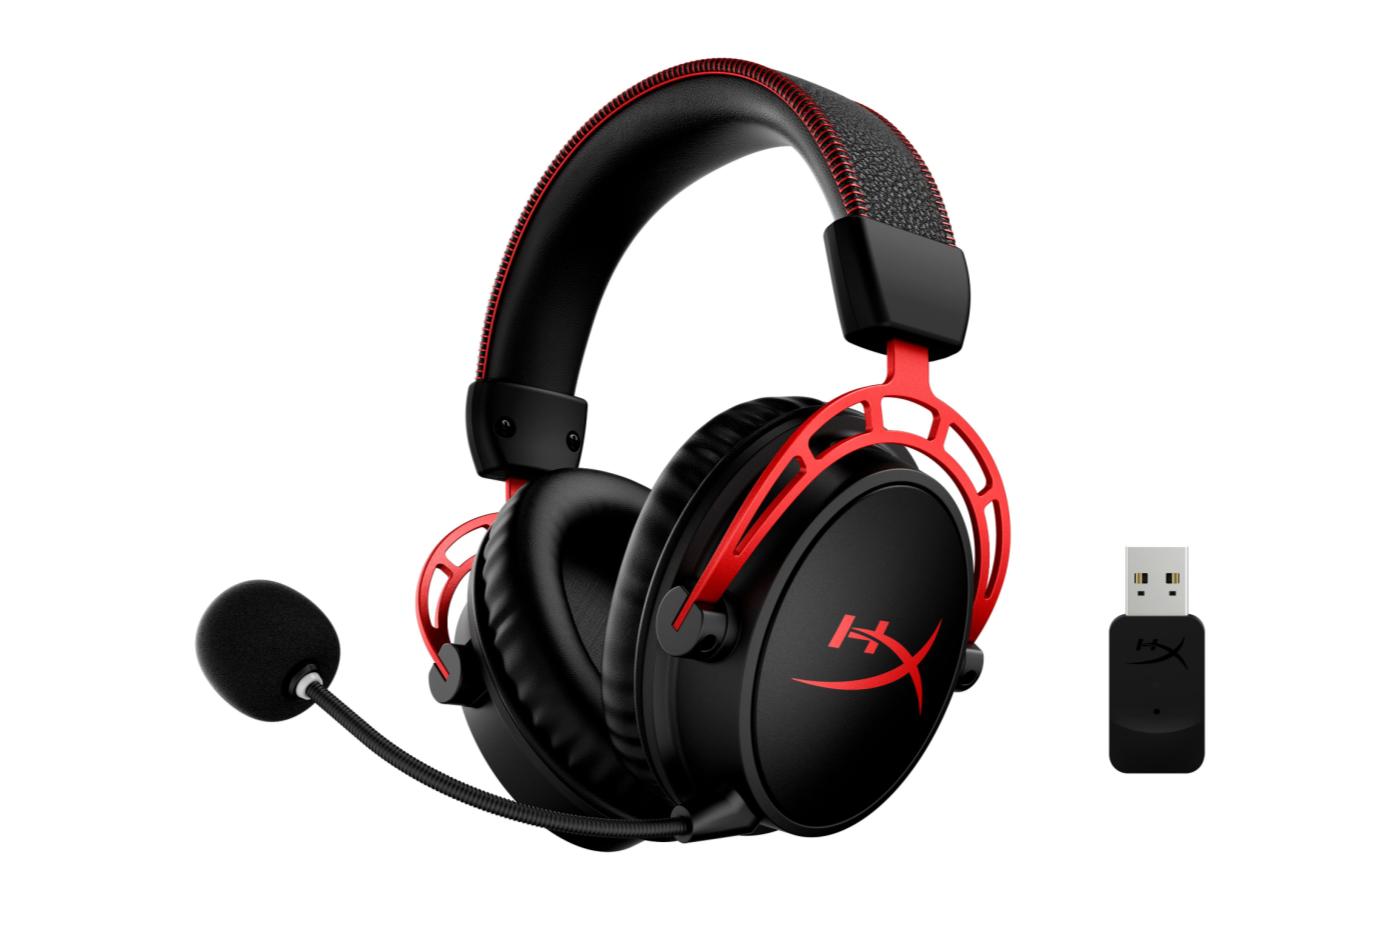 HyperX CES 2022 gaming headset